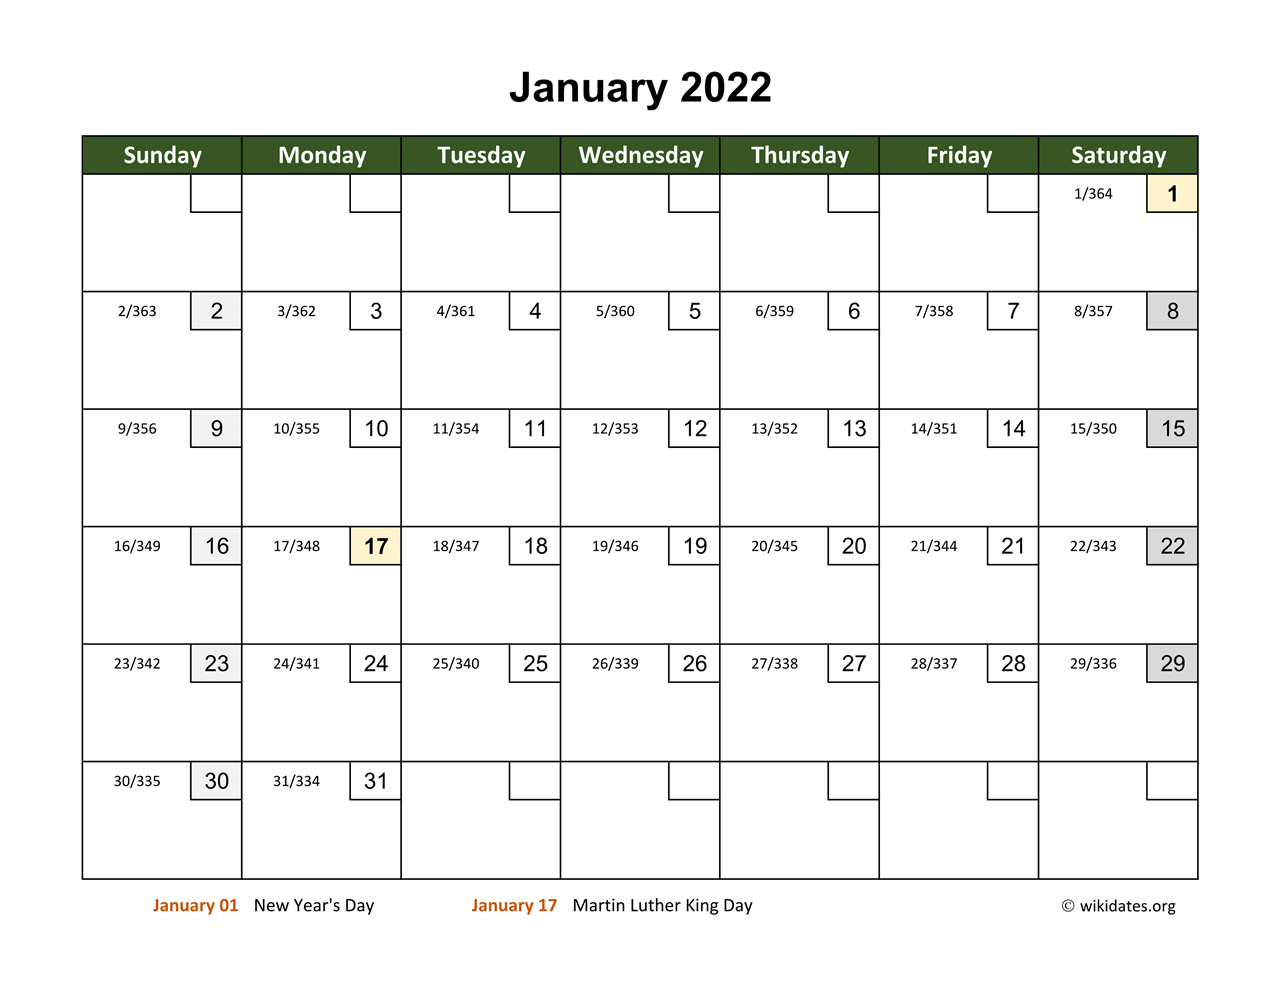 Day By Day Calendar 2022 Monthly 2022 Calendar With Day Numbers | Wikidates.org